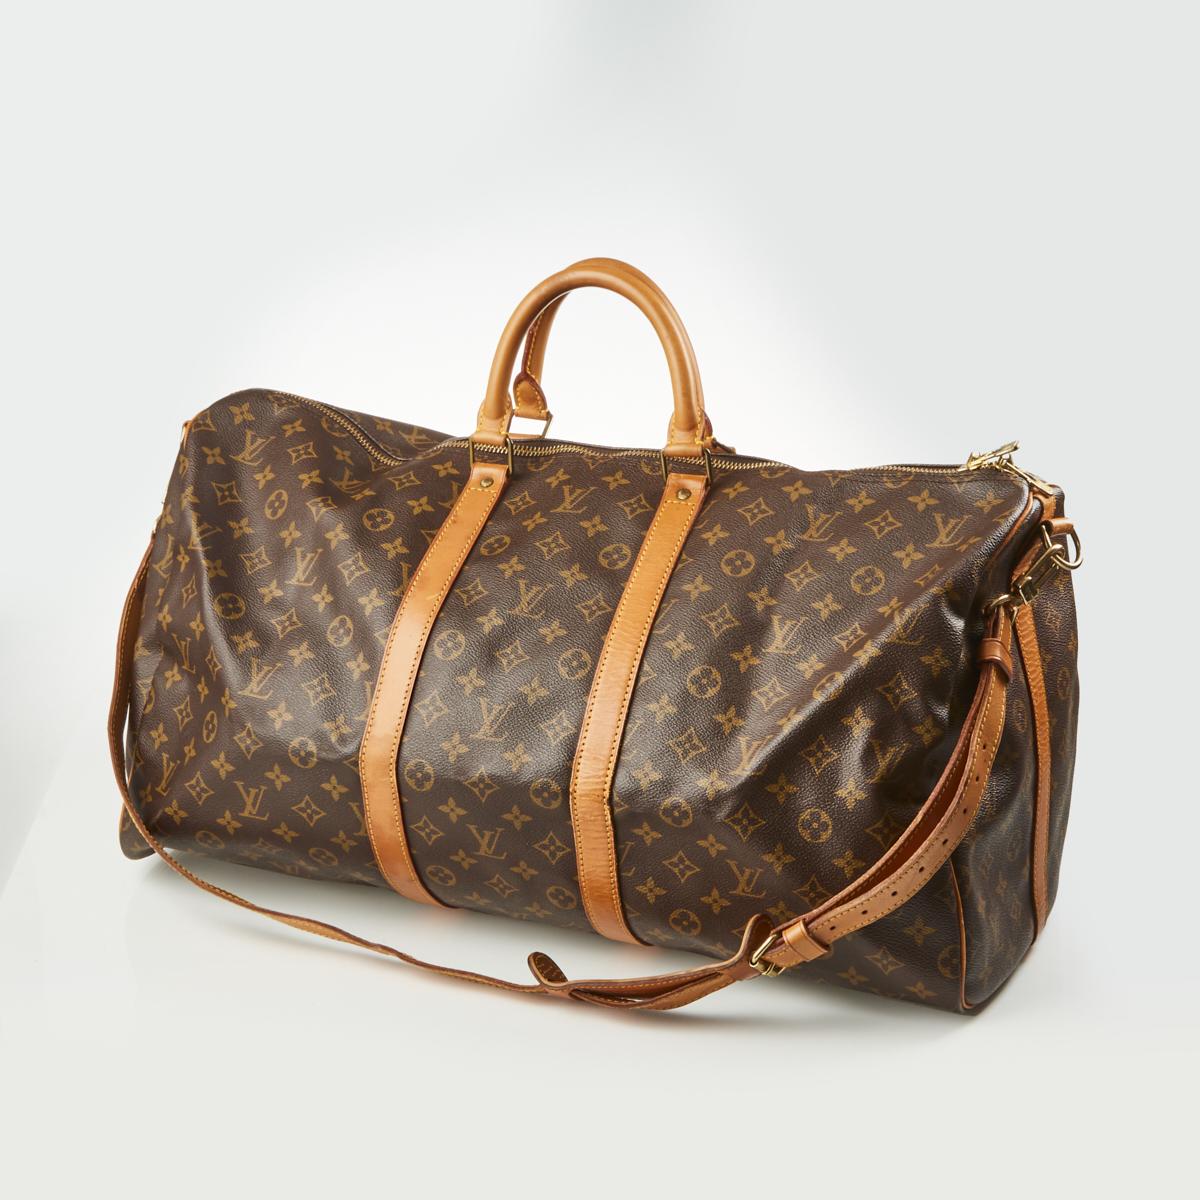 Sold at Auction: Louis Vuitton Keepall Bandouliere Bag Limited